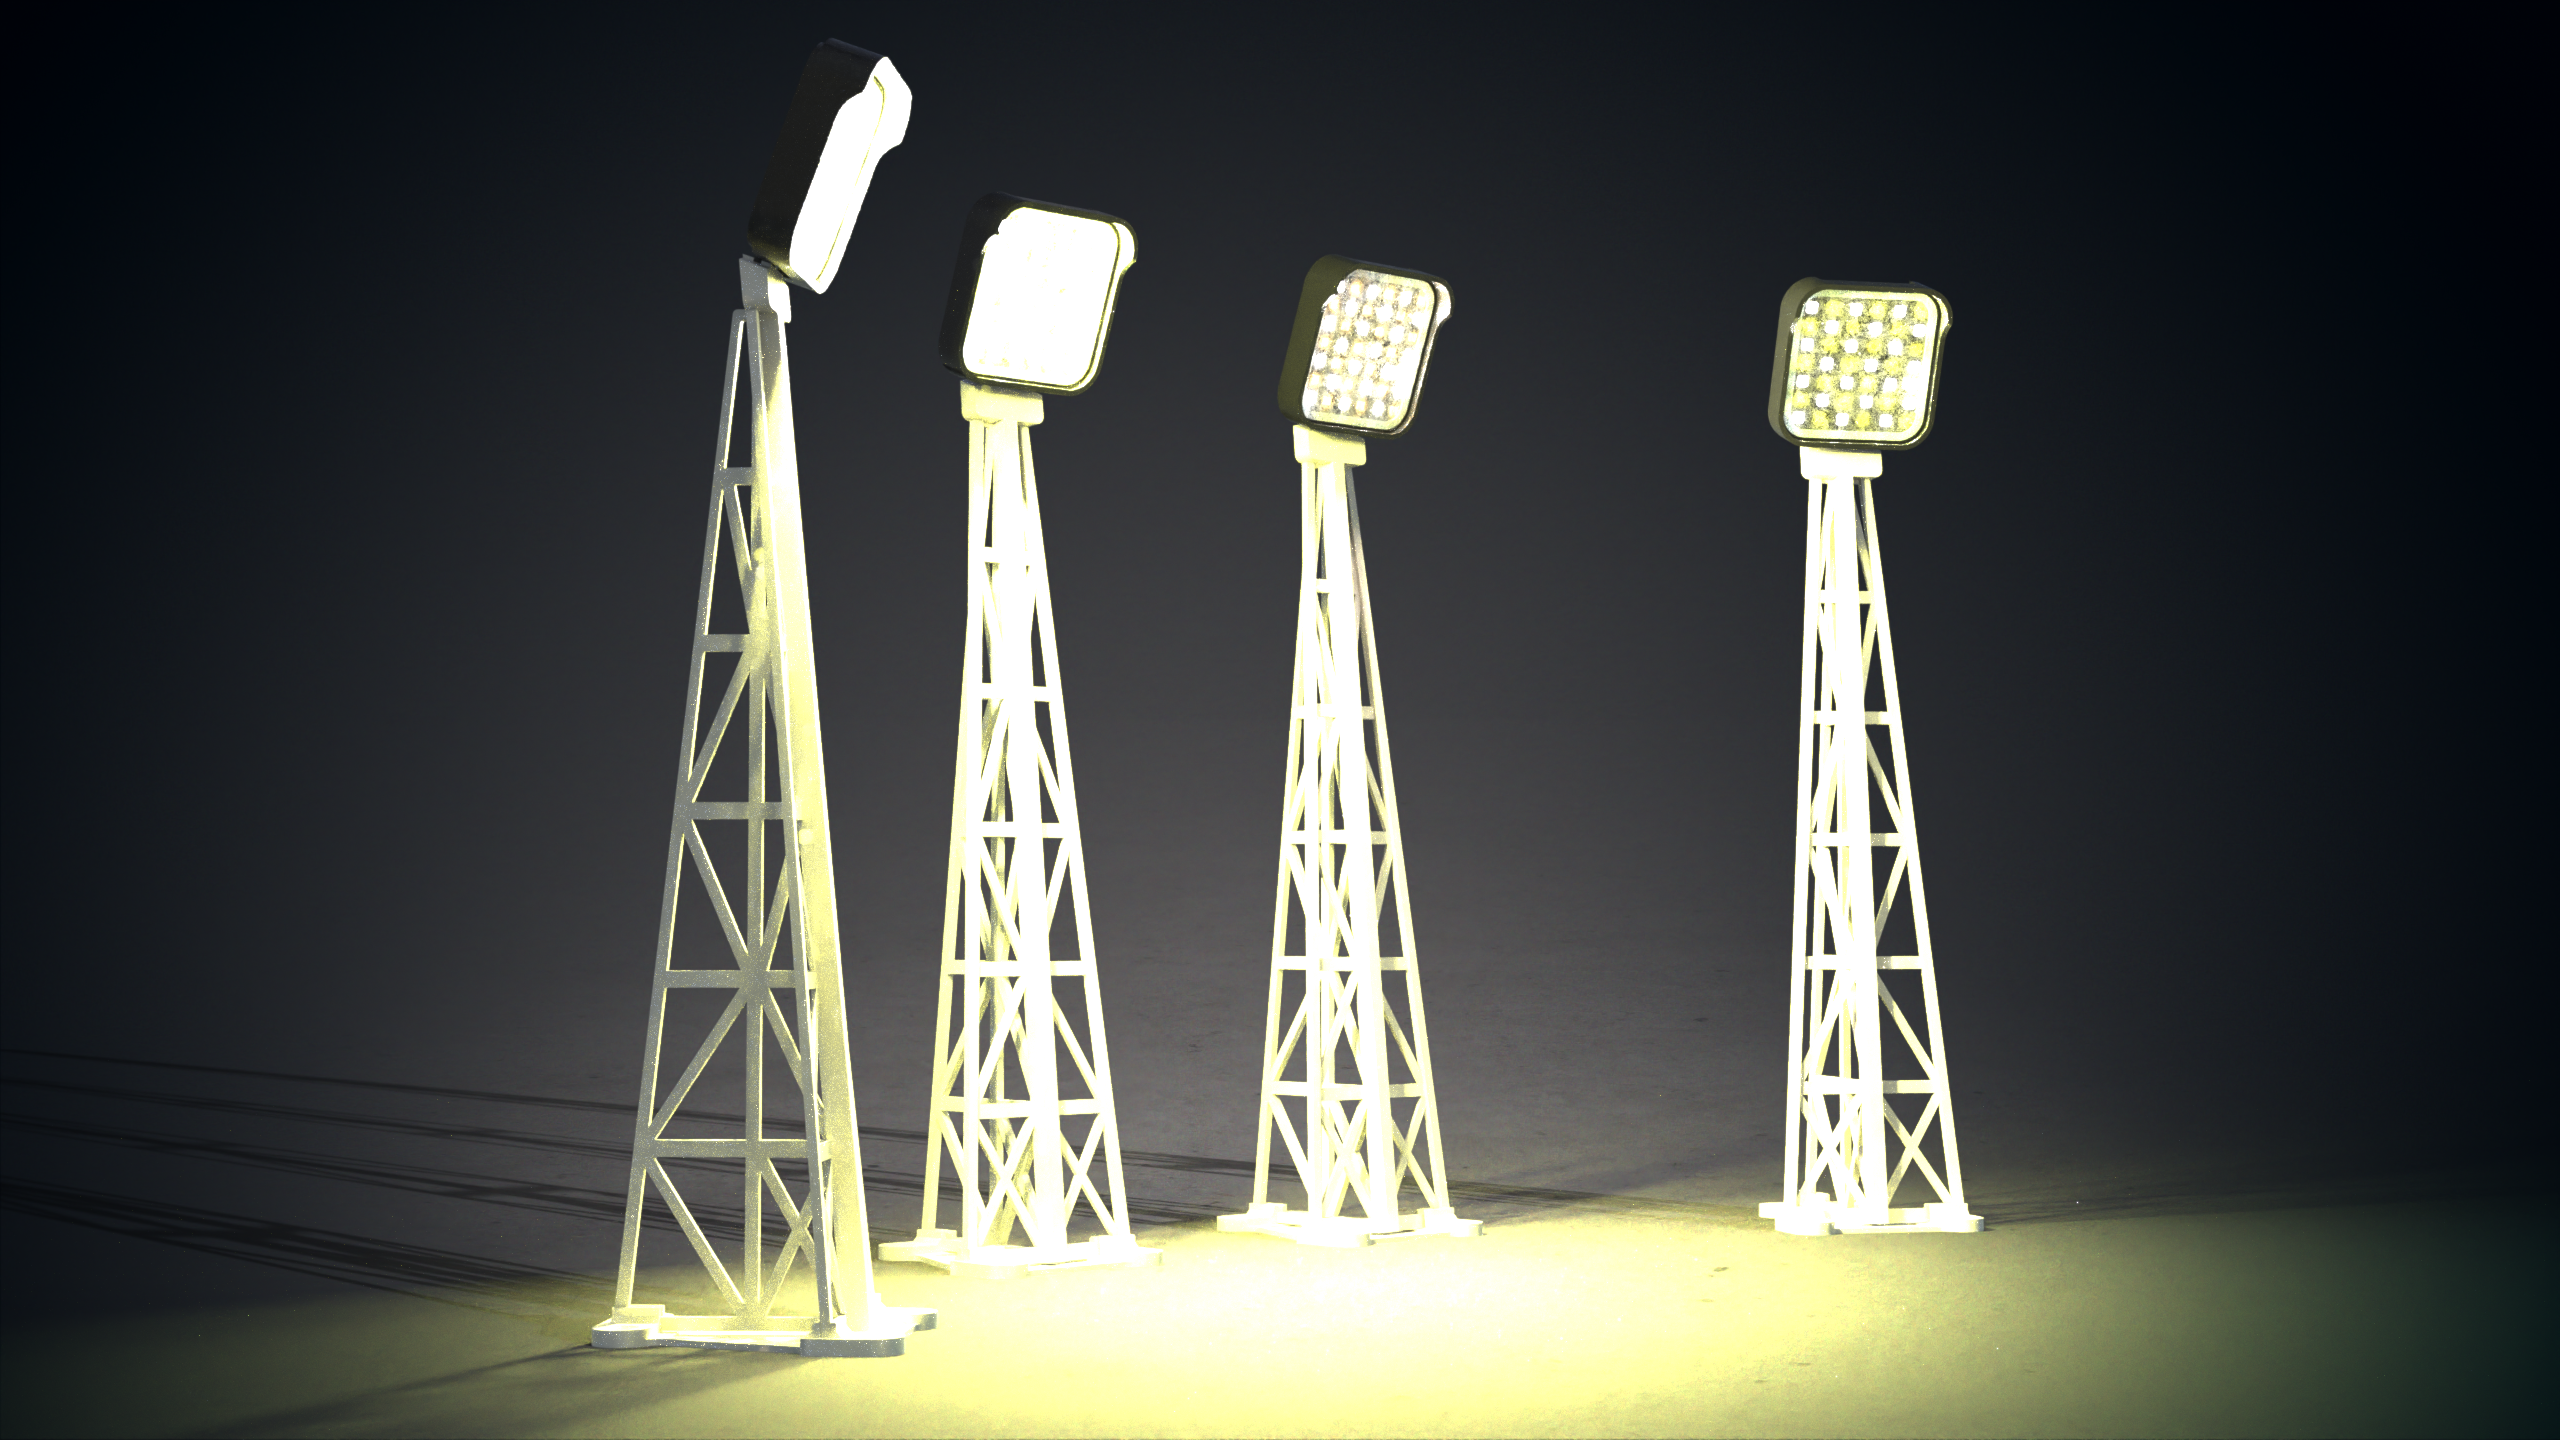 Set of four  FX-42 FLOODLIGHTS POWERED BY 42 LEDS